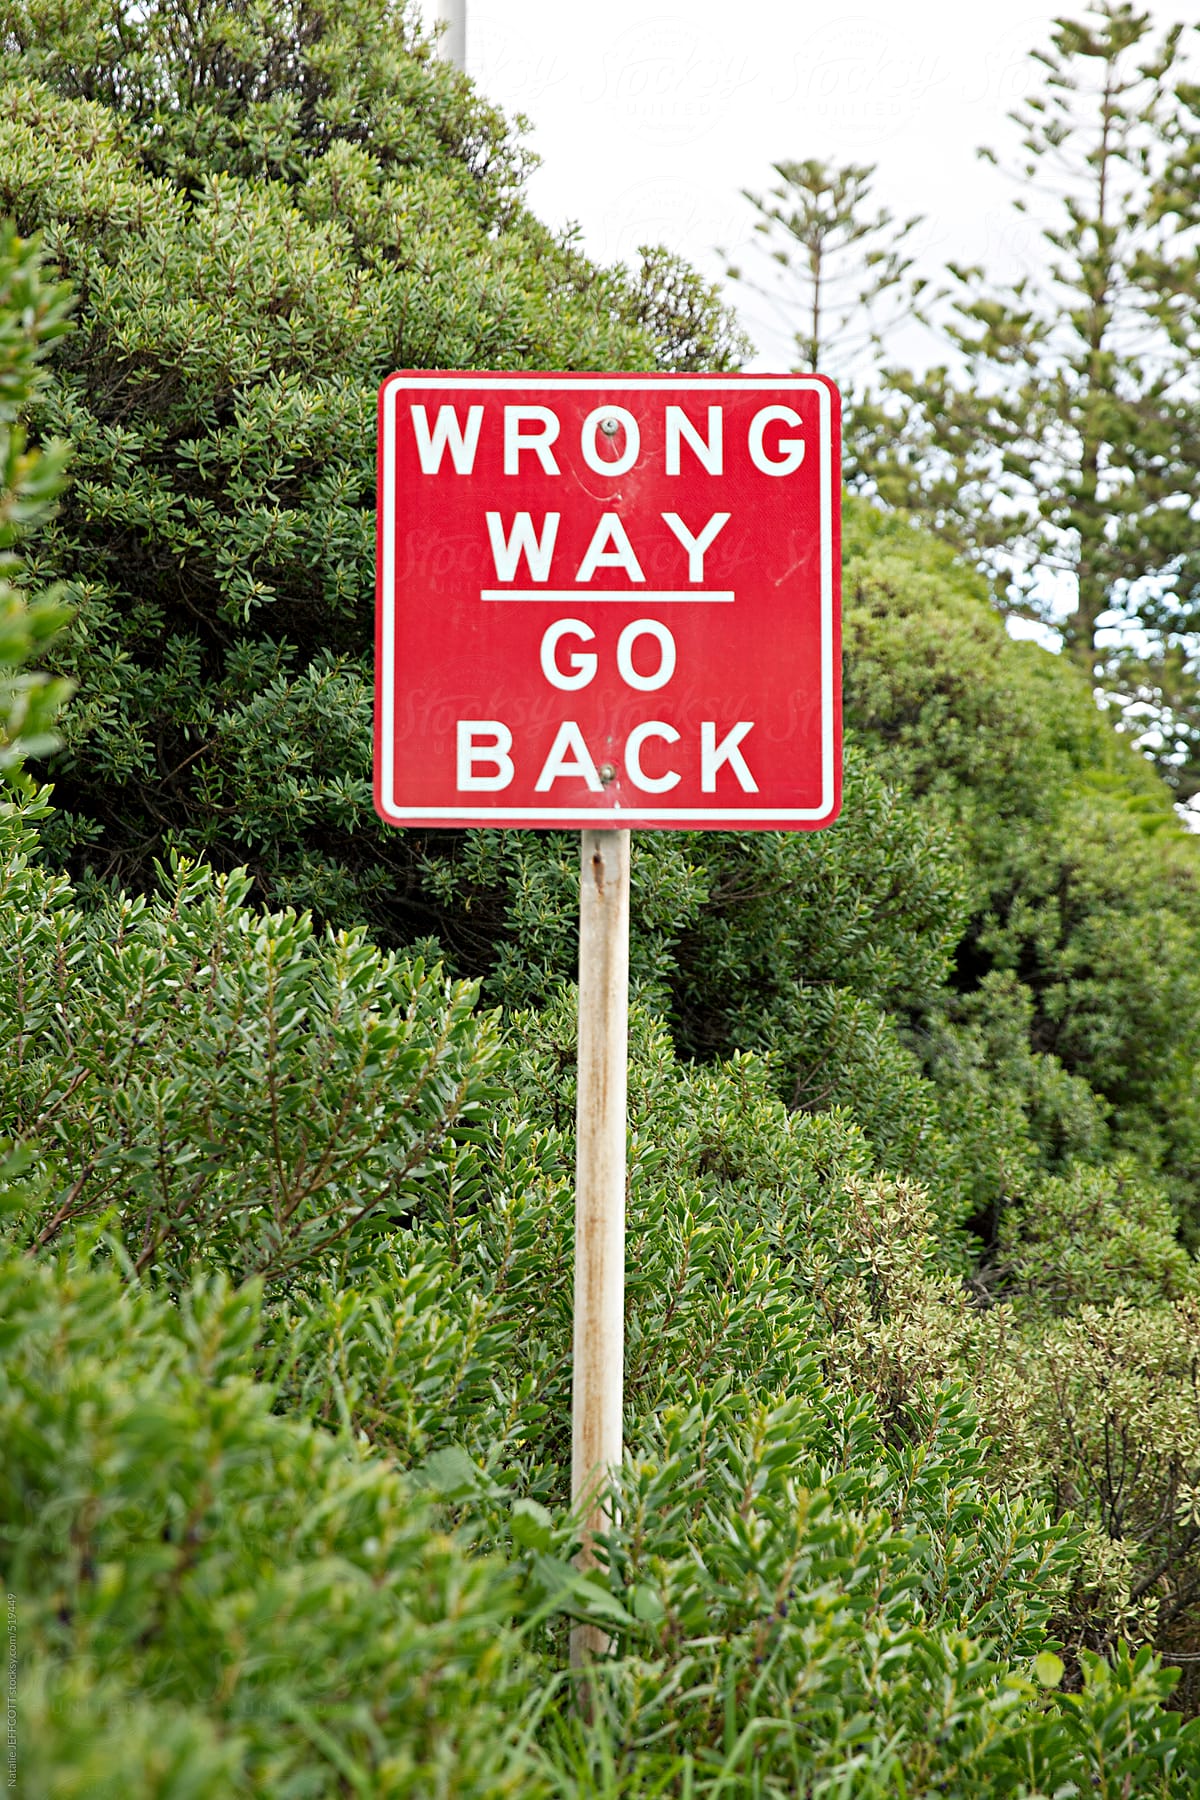 wrong way go back sign in bushes